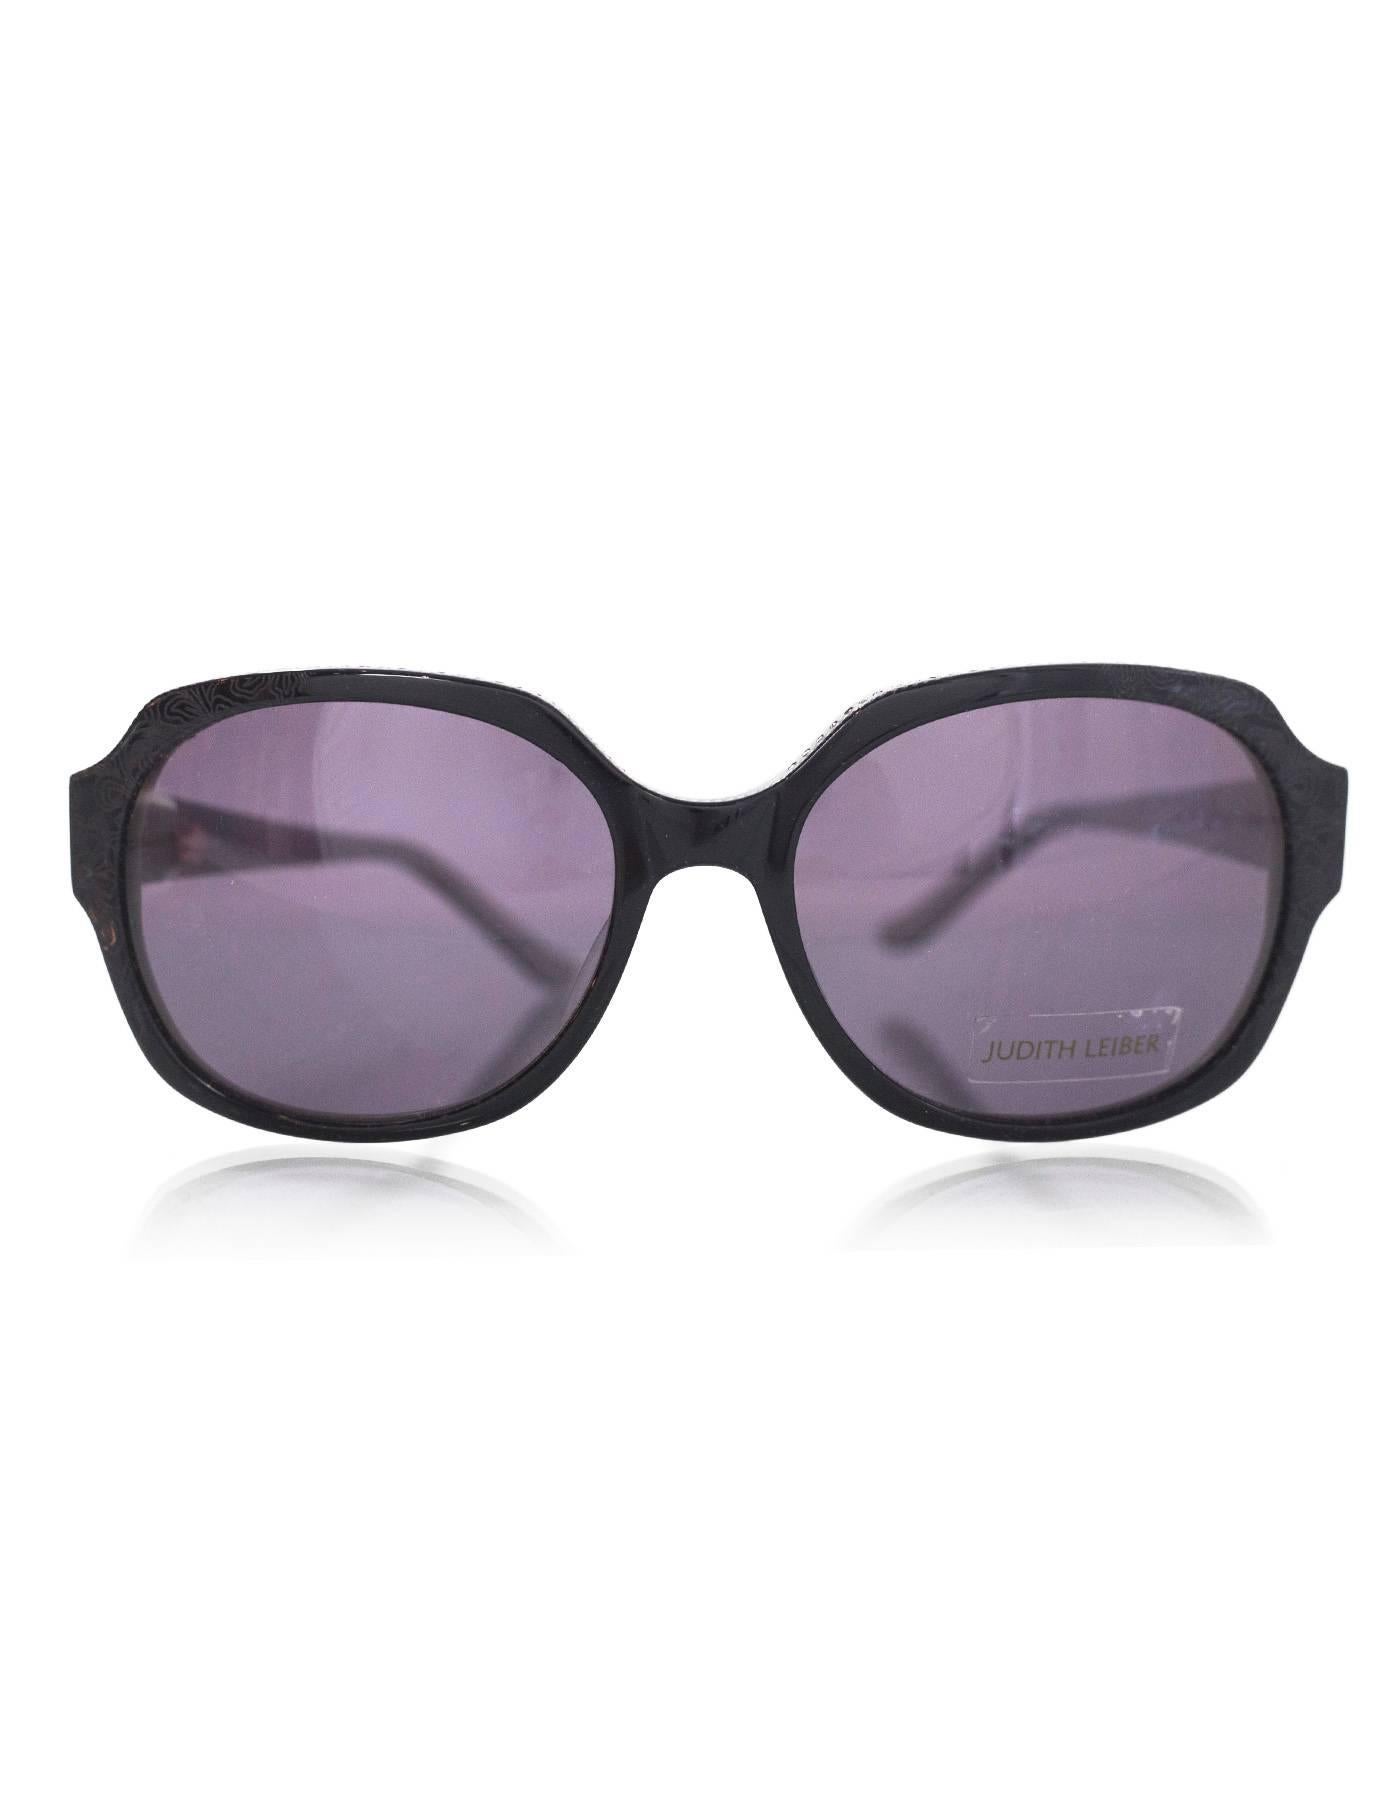 Judith Leiber Black Swarovski Crystal Sunglasses
Features crystals at top of frame and arms and floral laser-etched design

Made In: Japan
Color: Black
Materials: Resin, crystal
Retail Price: $420 + tax
Overall Condition: Excellent pre-owned